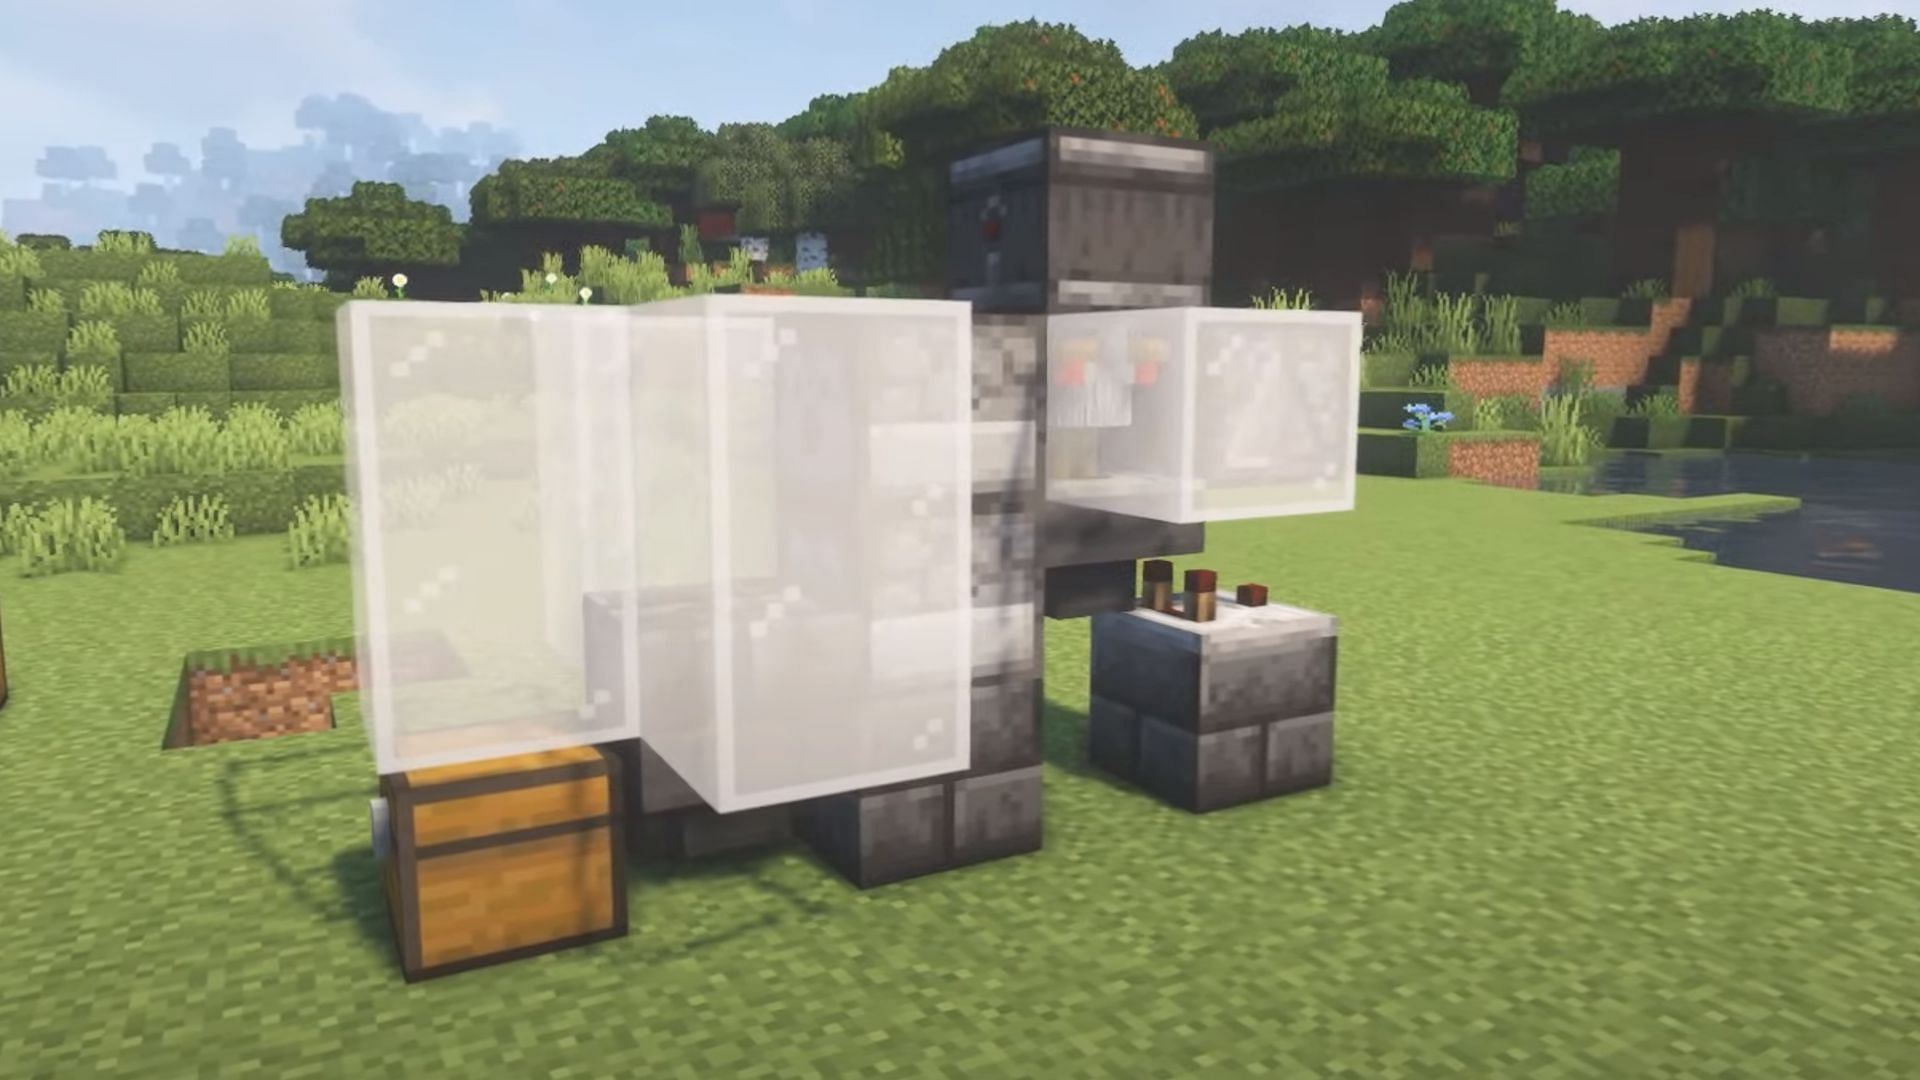 Chicken cookers are also quite compact (Image via Madzify/YouTube)